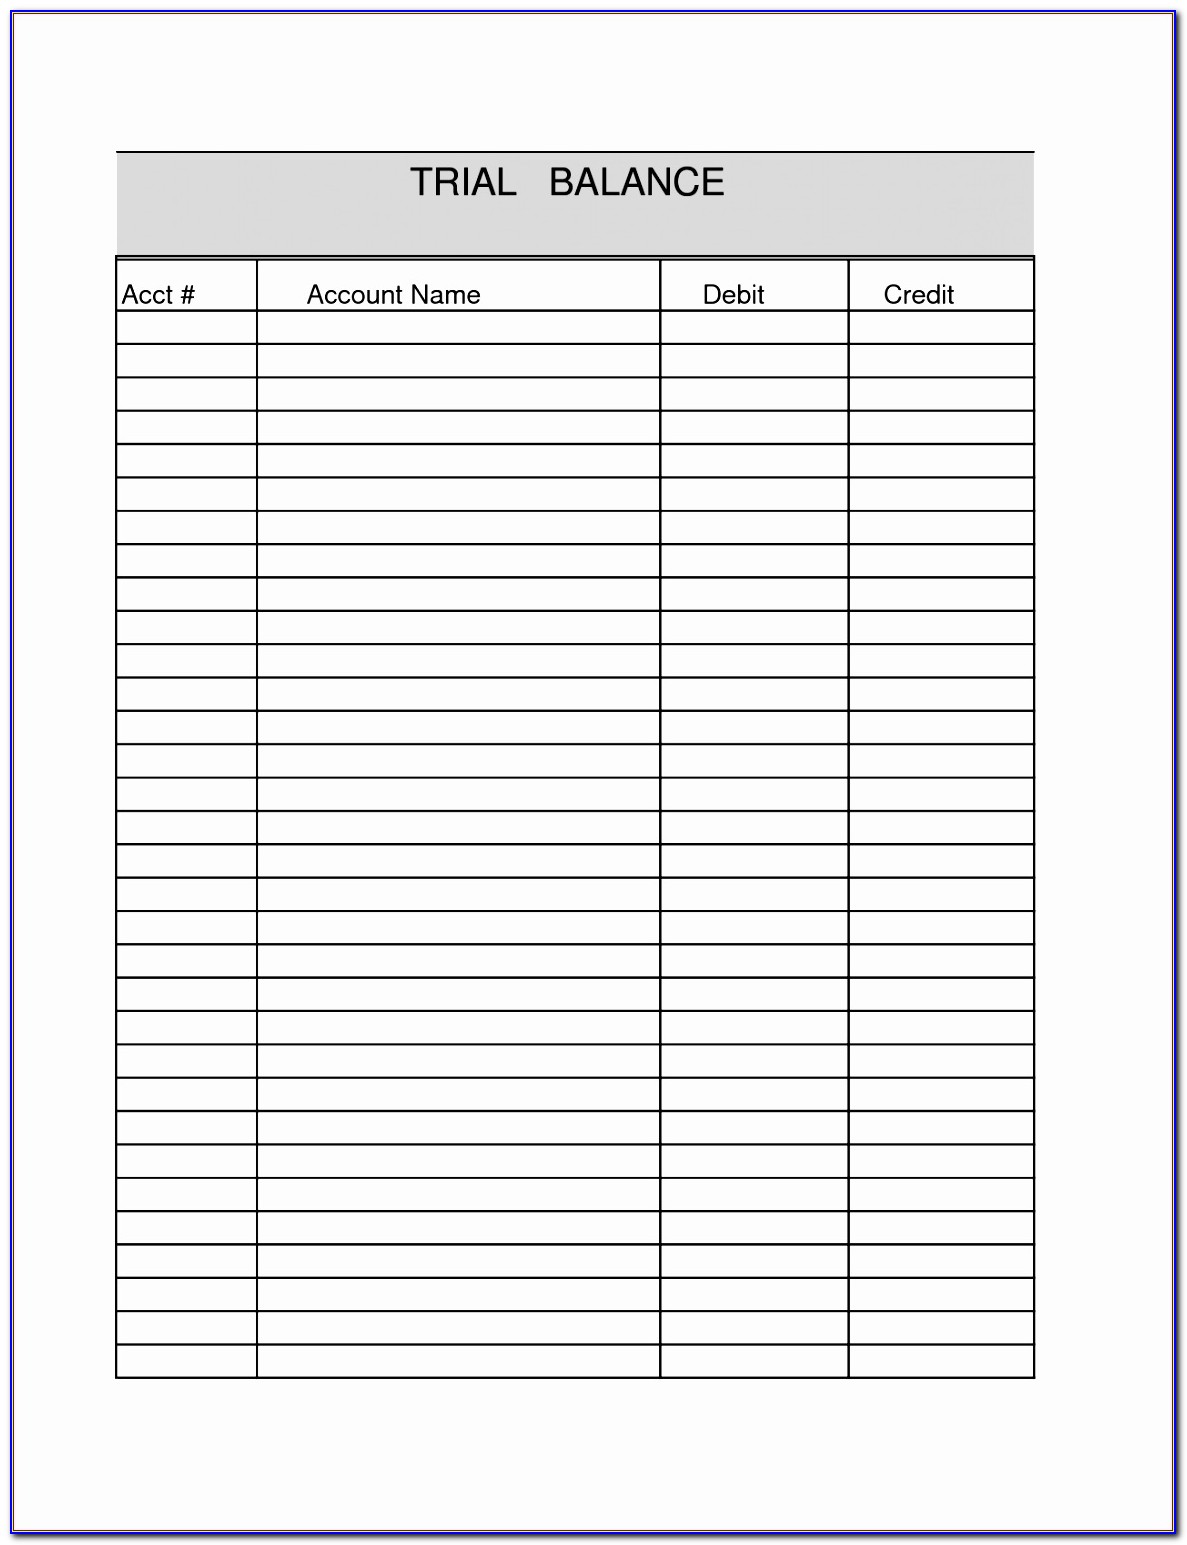 Excel General Ledger Template Udoxl Beautiful Printable Account Ledger Fax Cover Sheet Free Template